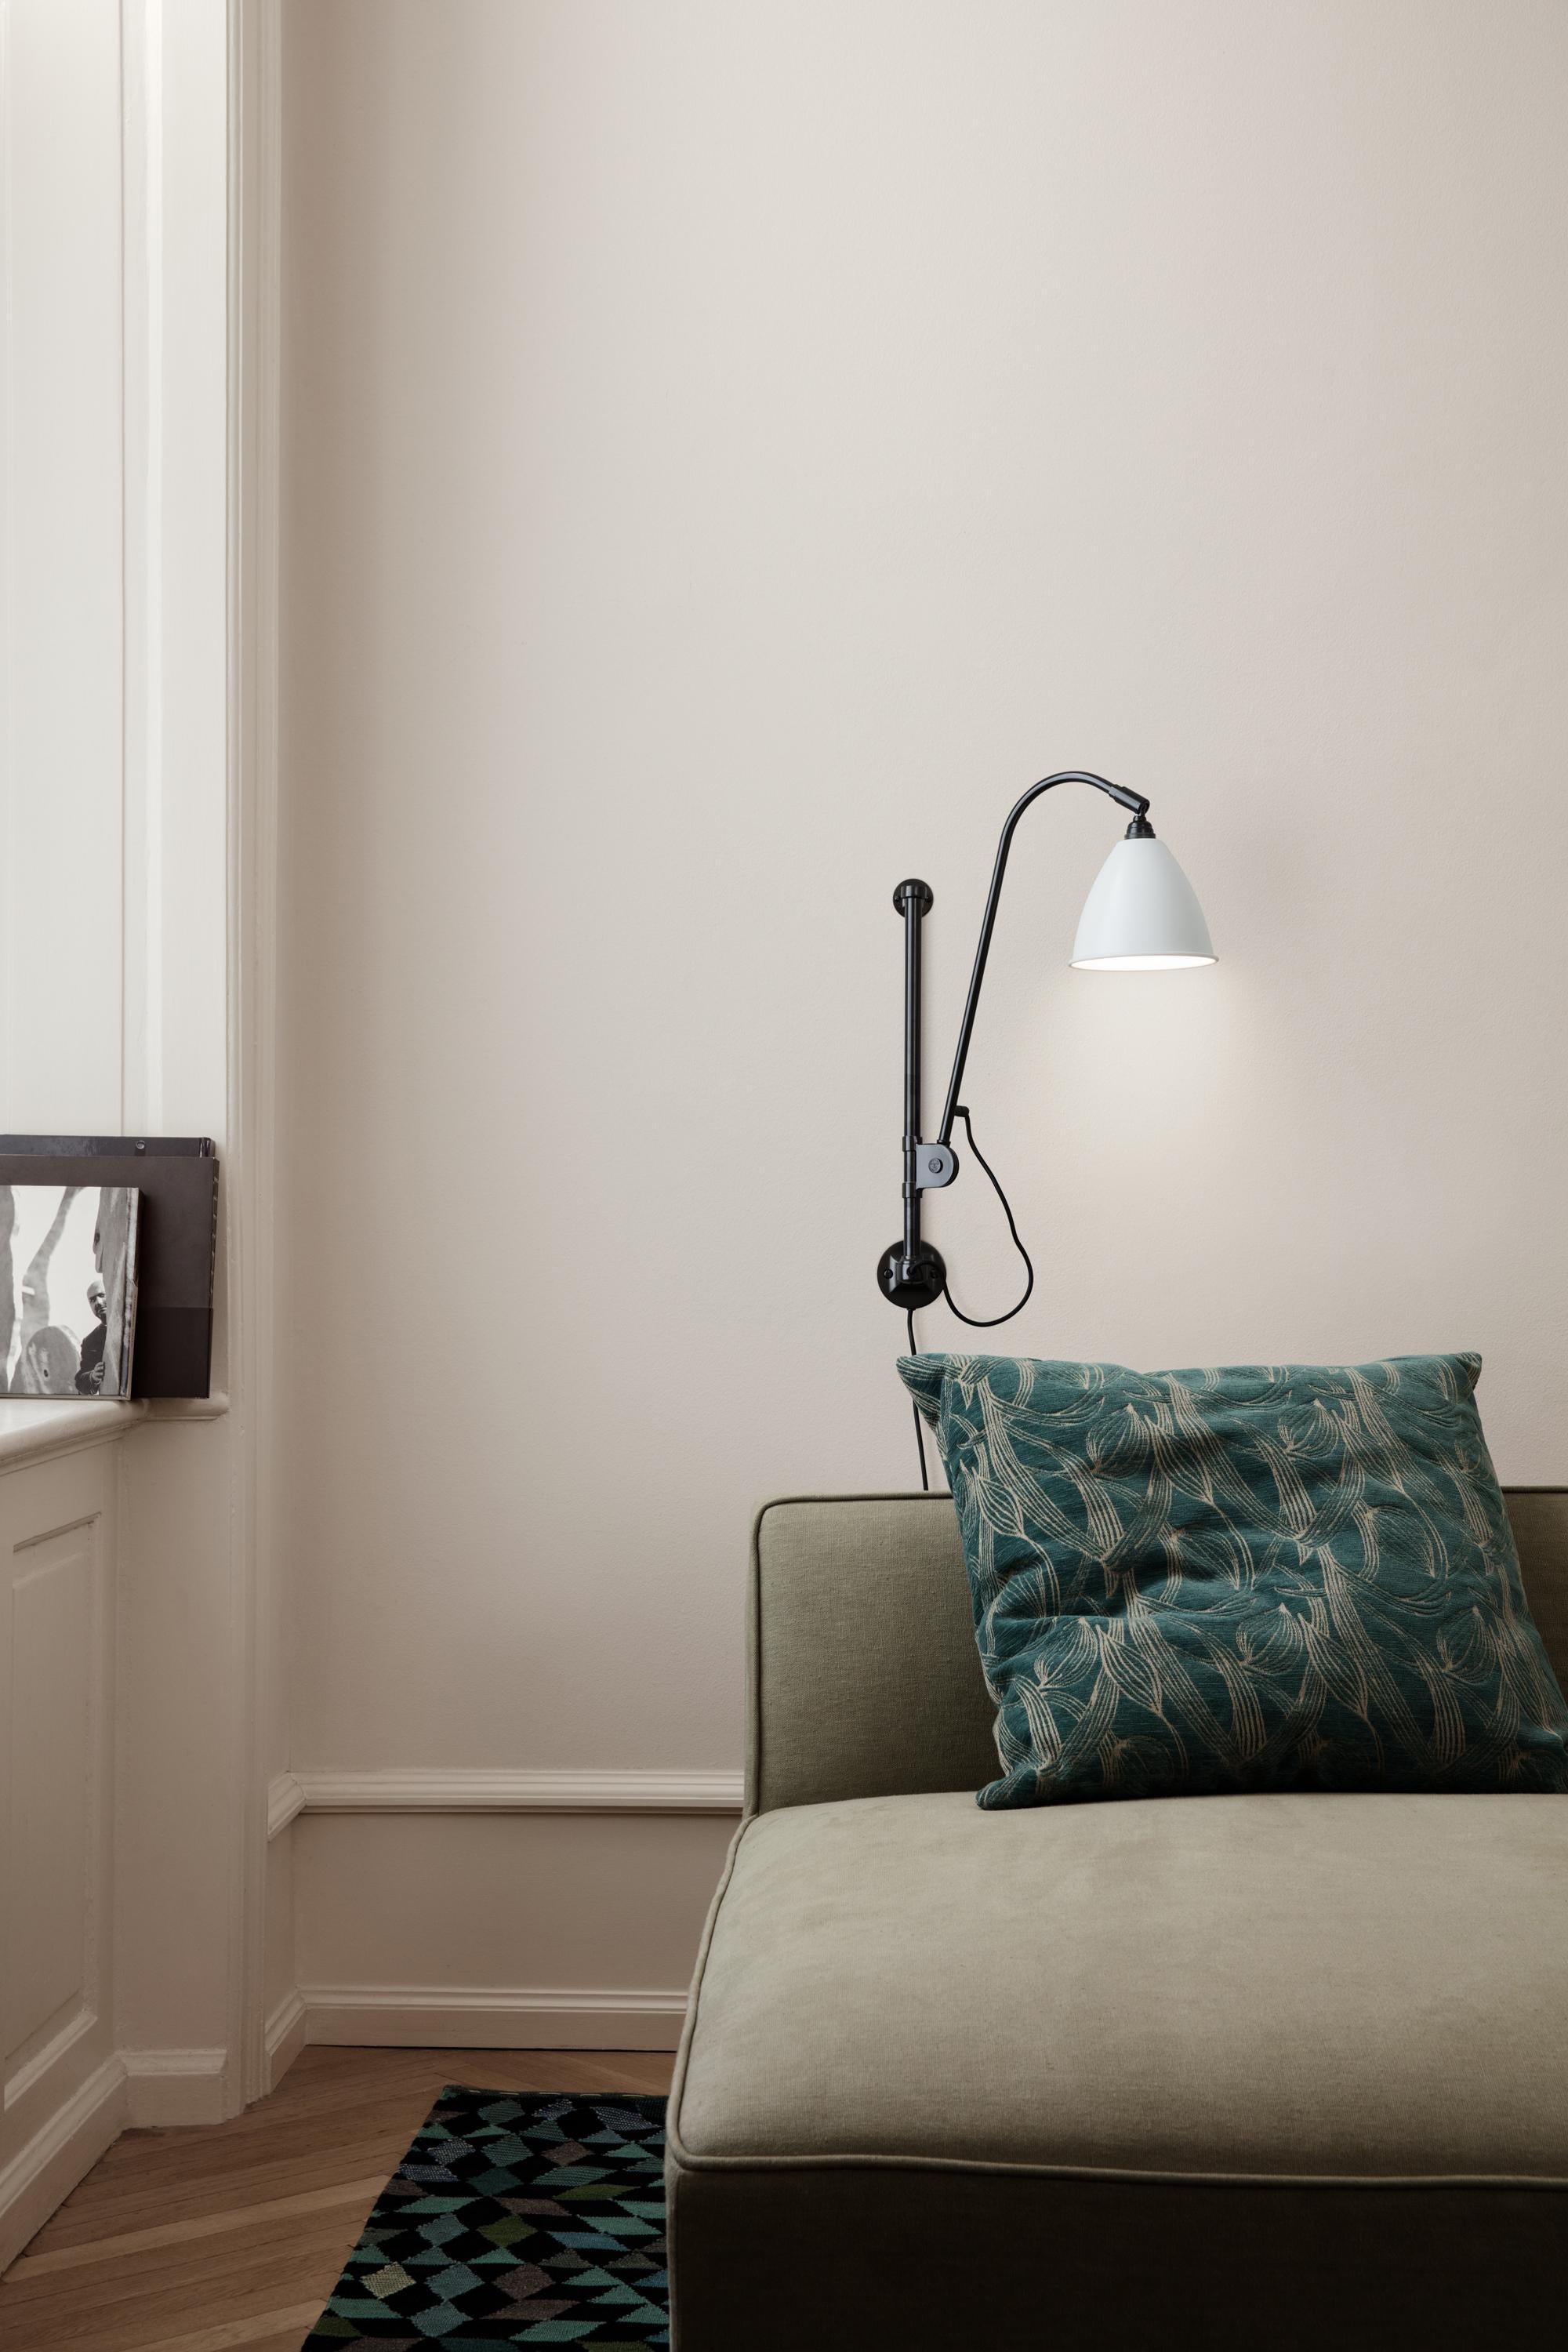 The timeless BL5 wall lamp was designed in 1930 by Robert Dudley Best, a British designer highly influenced by the school of Bauhaus. Being in continuous production ever since its origin, the Bestlite BL5 Wall Lamp stays true to its industrial roots